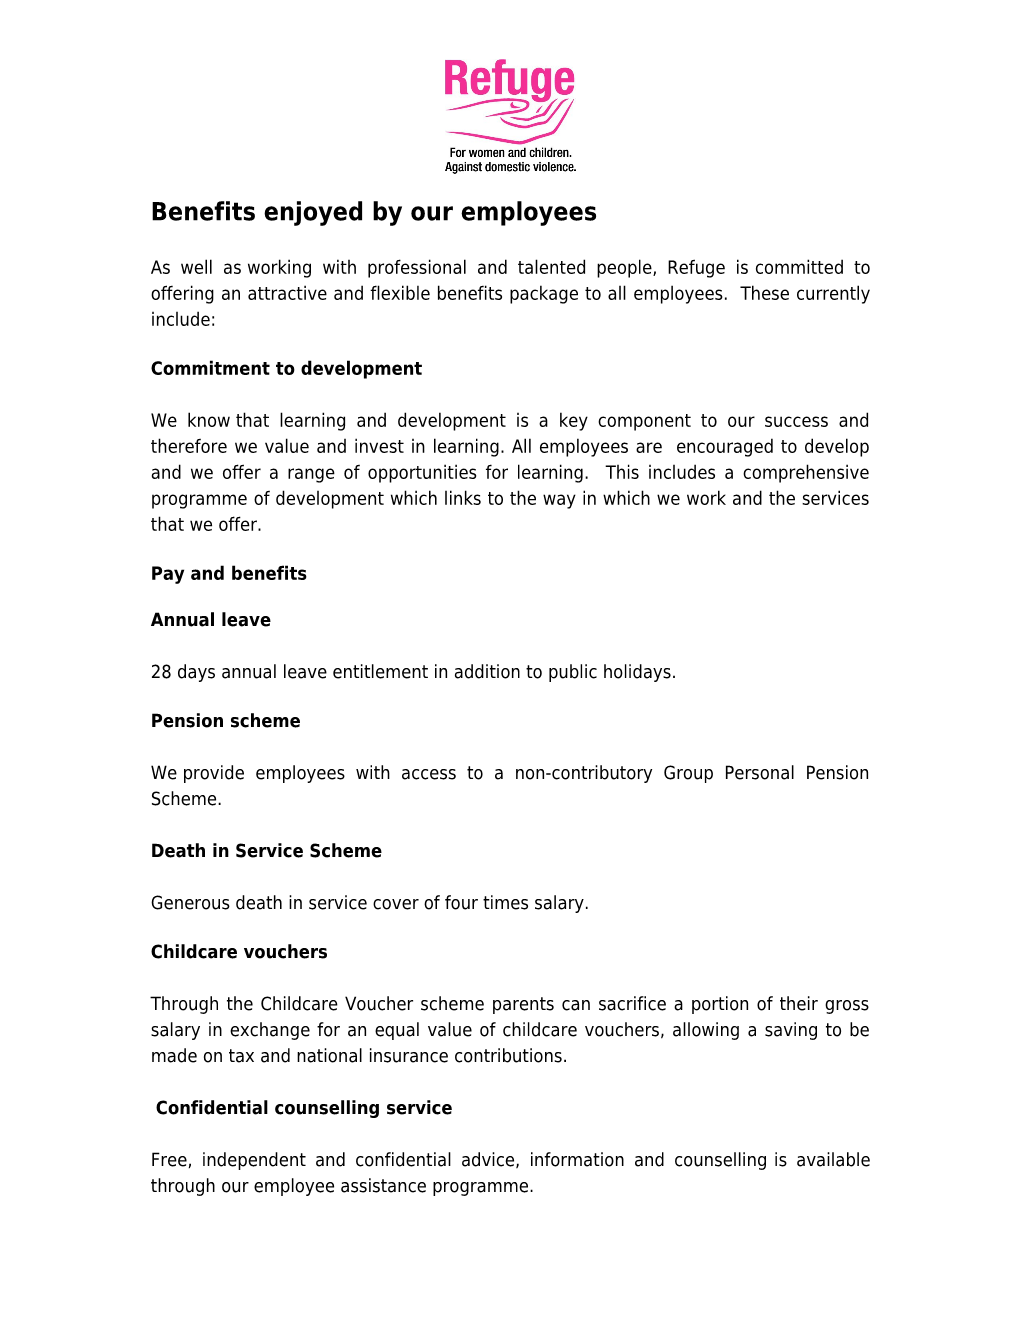 Benefits Enjoyed by Our Employees